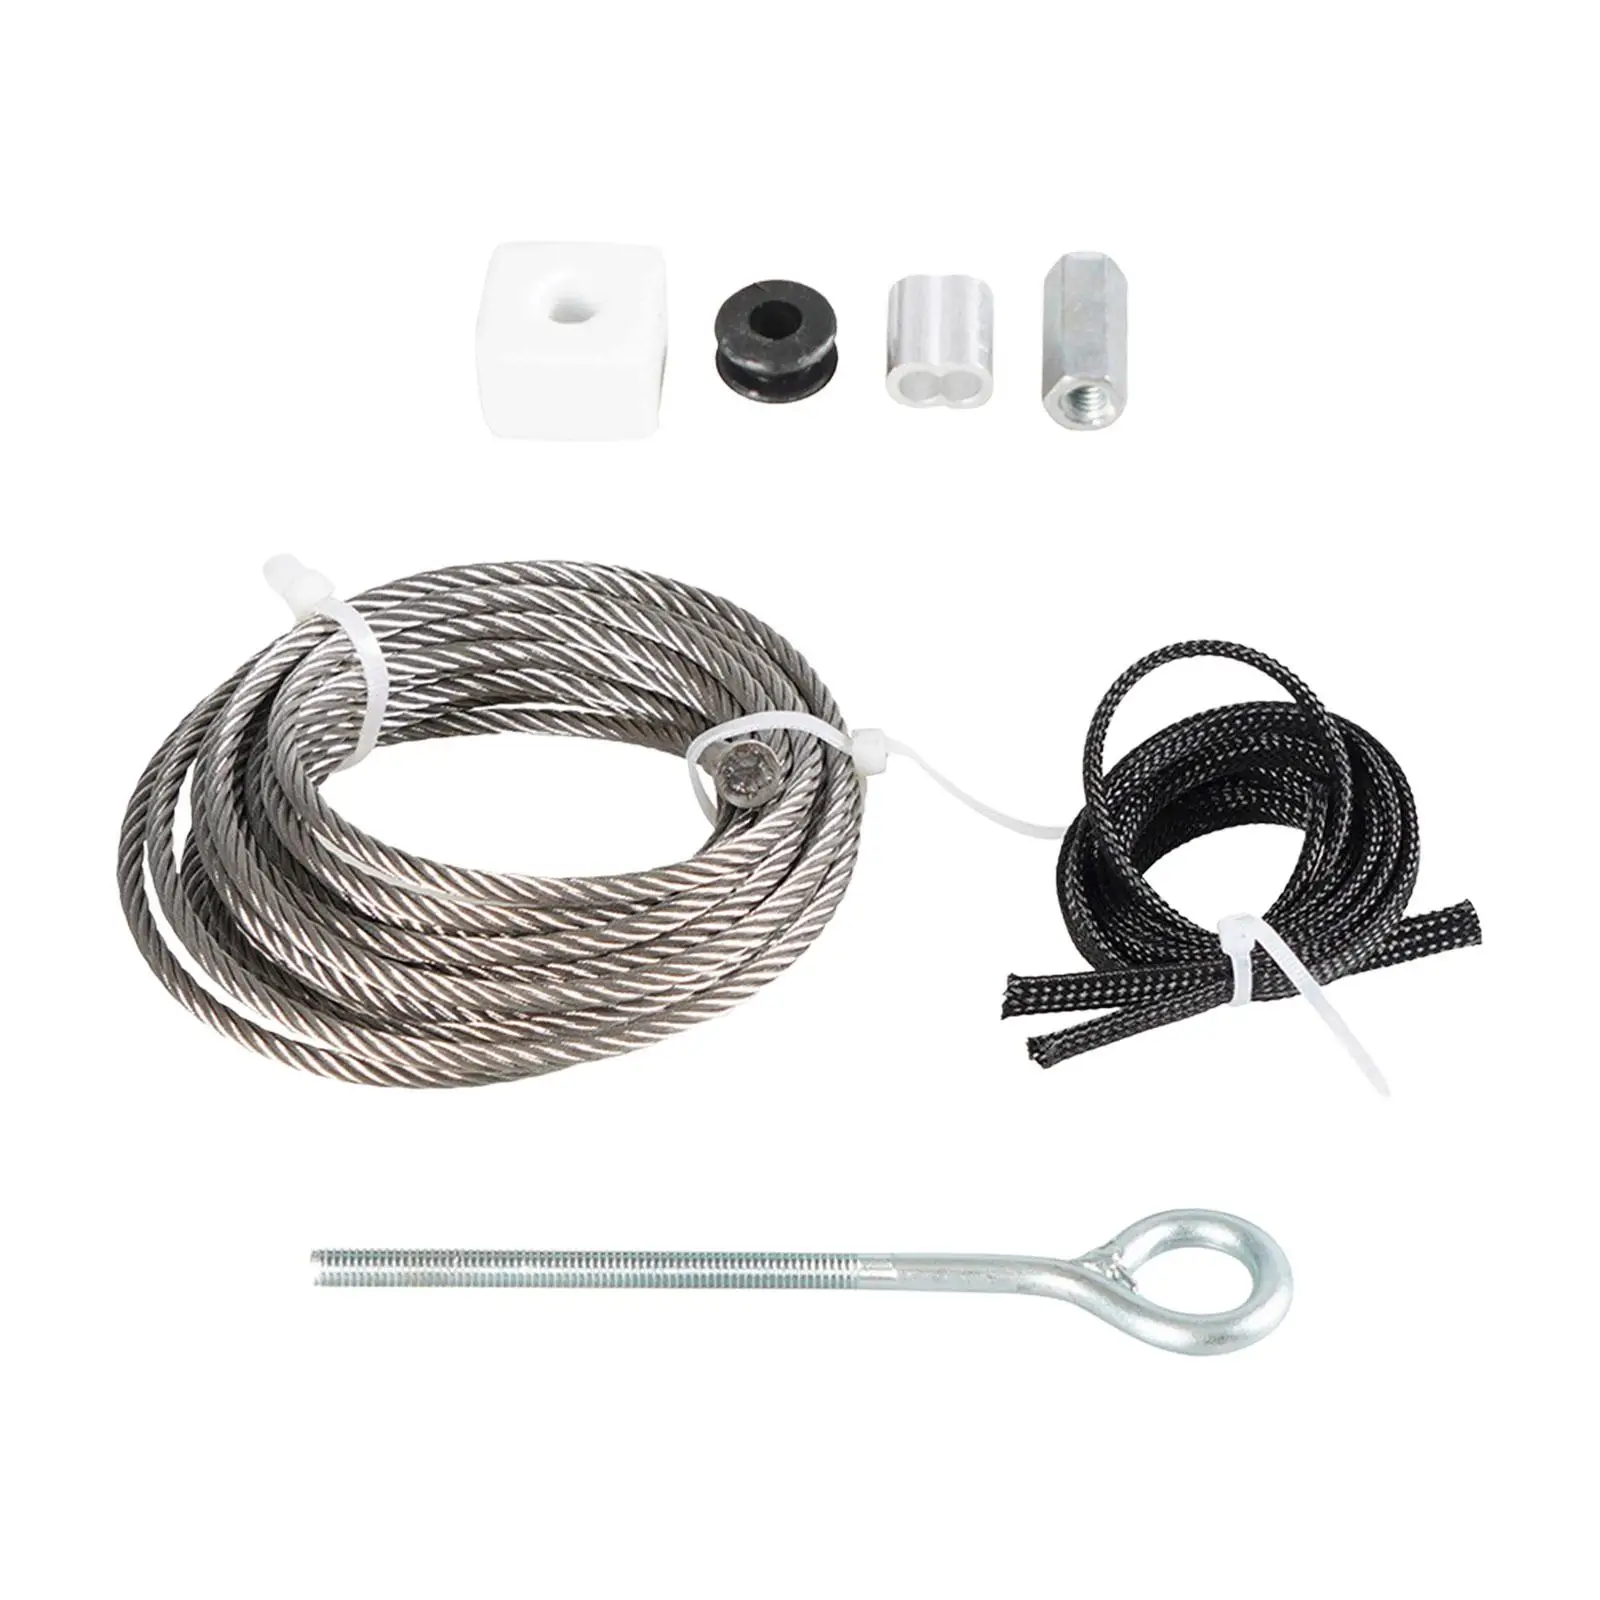 RV Cable Repair Set Universal Replacement Parts for Accuslide System